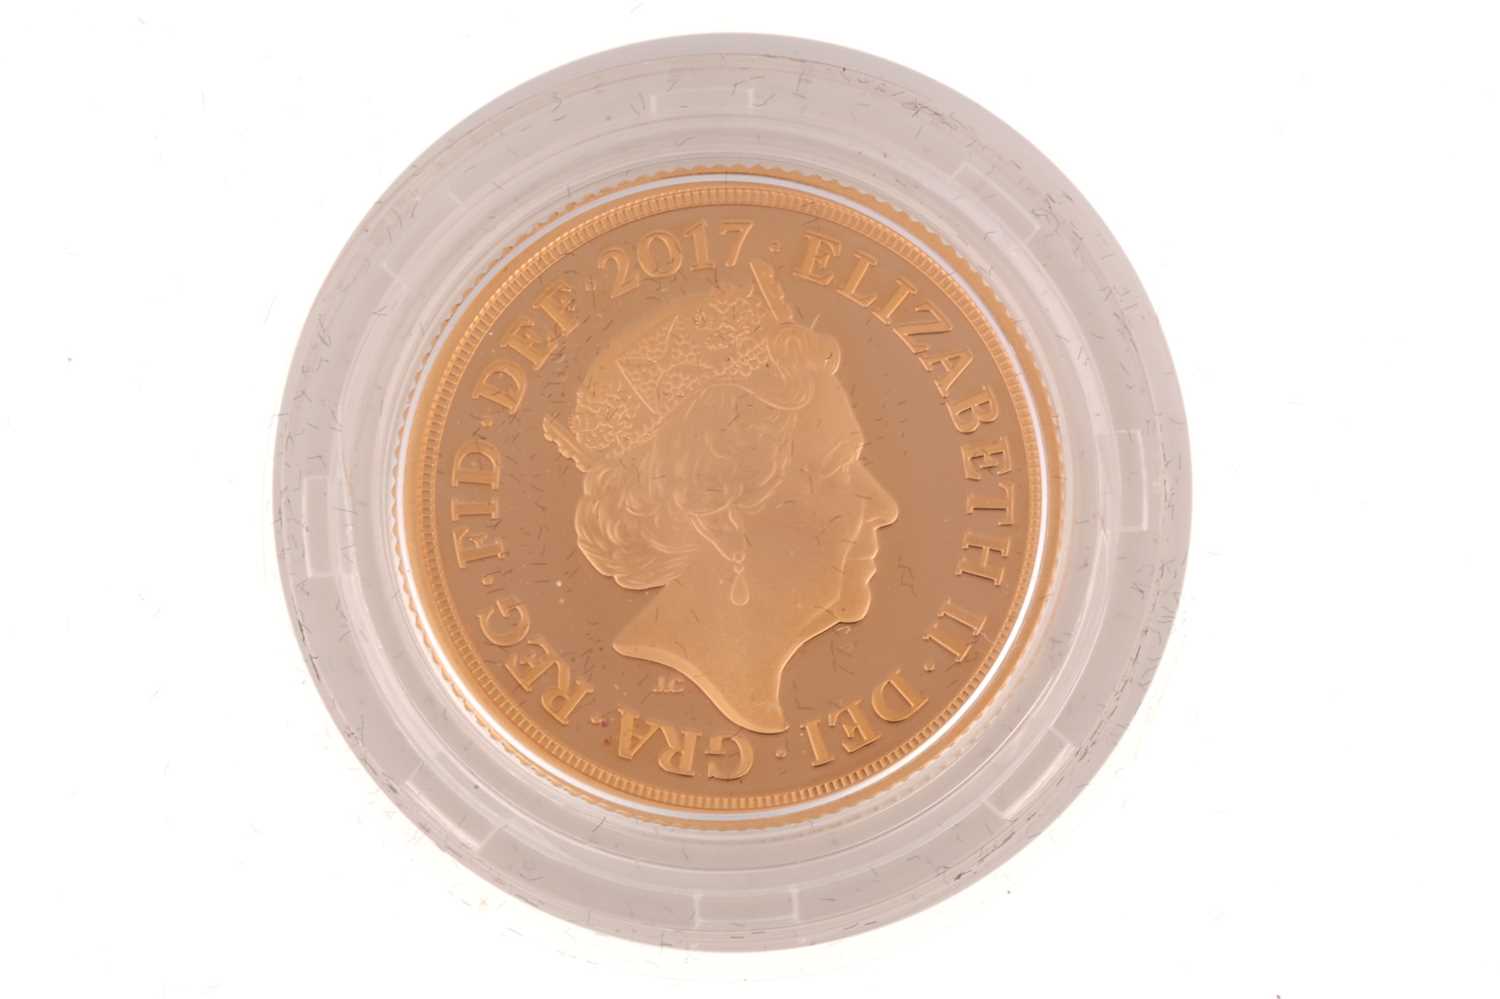 Elizabeth II gold proof The Sovereign, 2017, complete within capsule and with certificate, booklet - Image 4 of 7